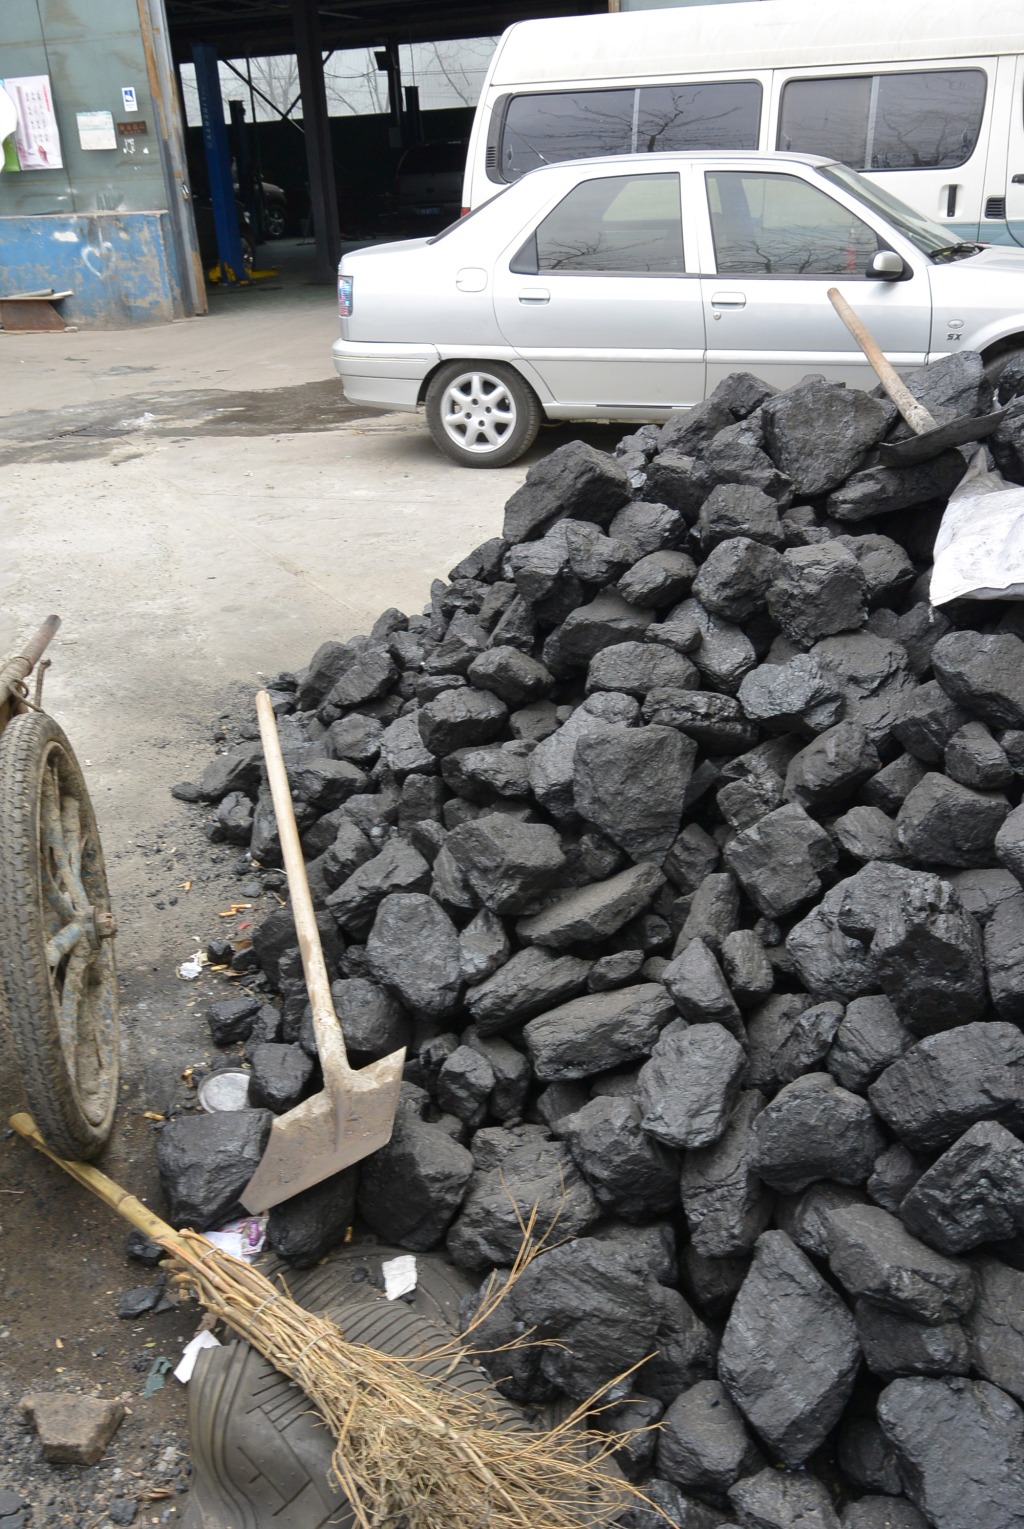 and a pile of coal...